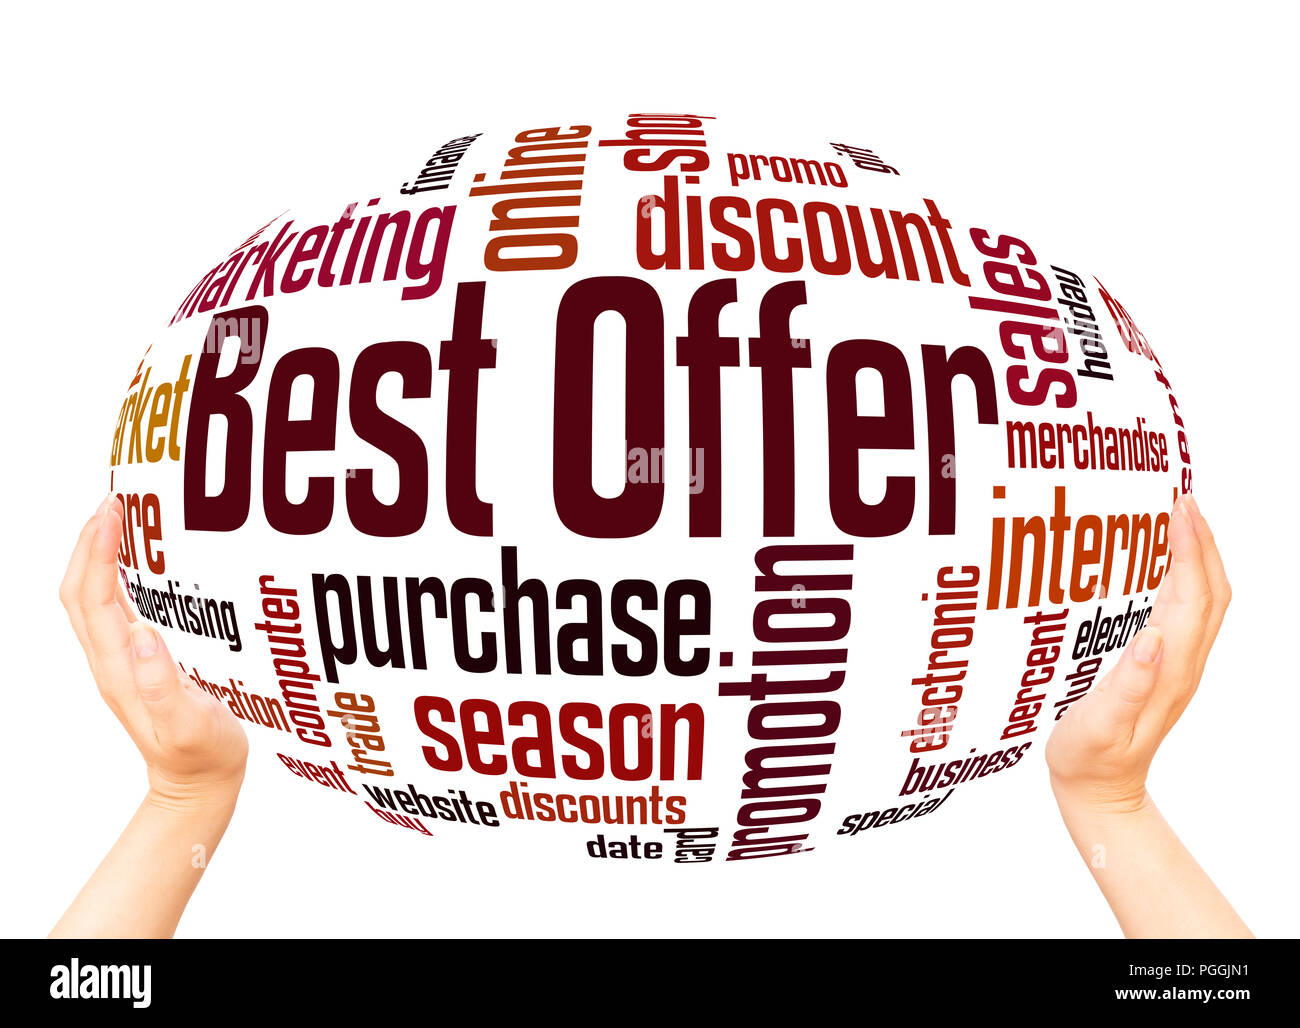 Best offer word cloud sphere concept on white background. Stock Photo